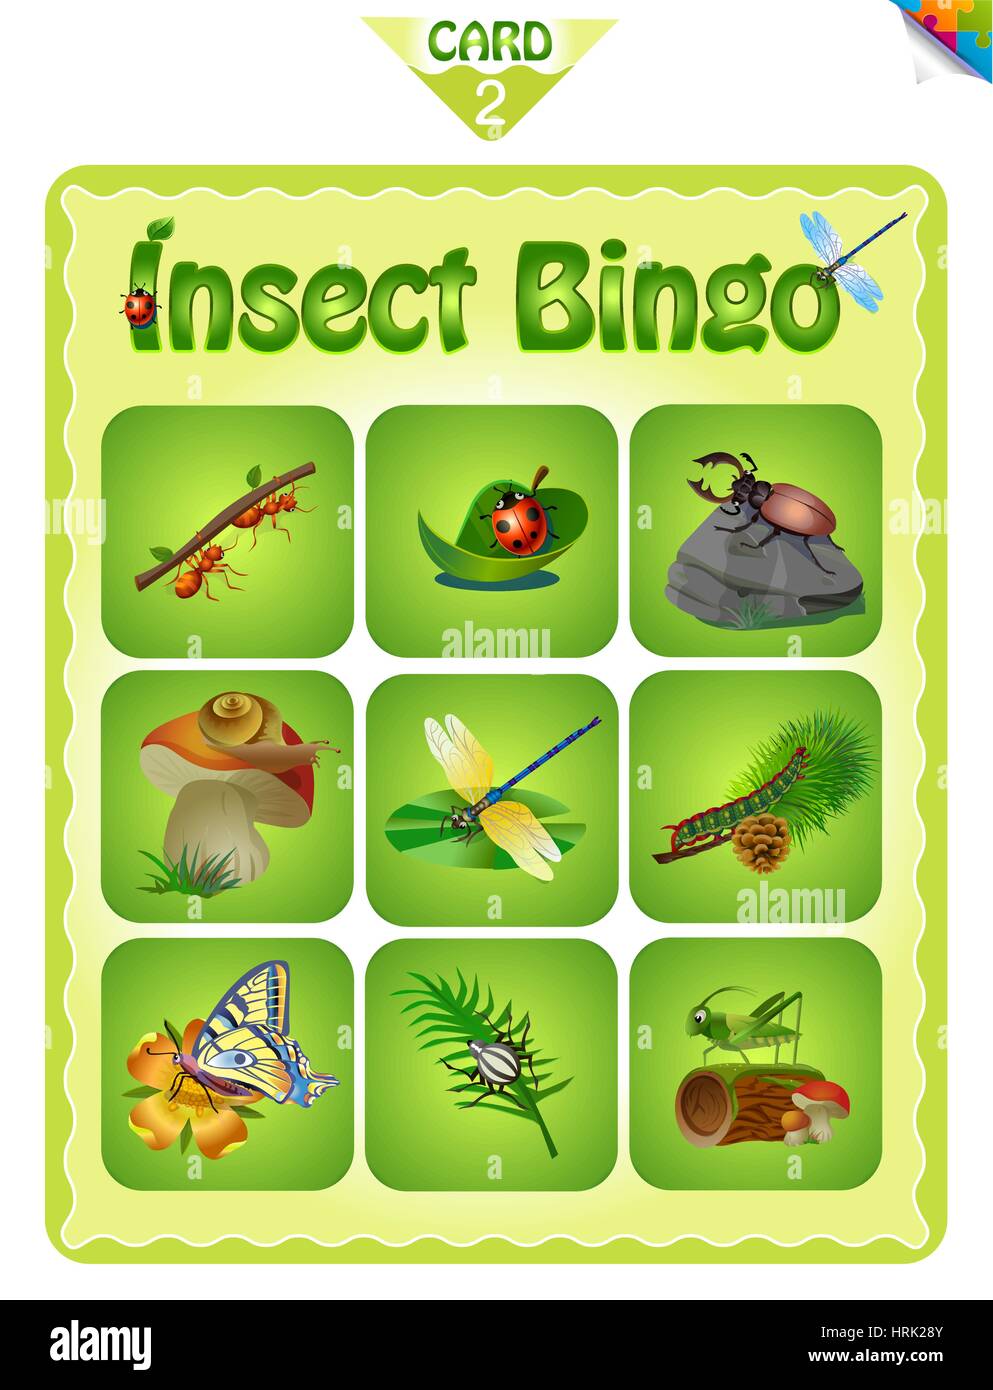 printable-educational-bingo-game-for-preschool-kids-with-different